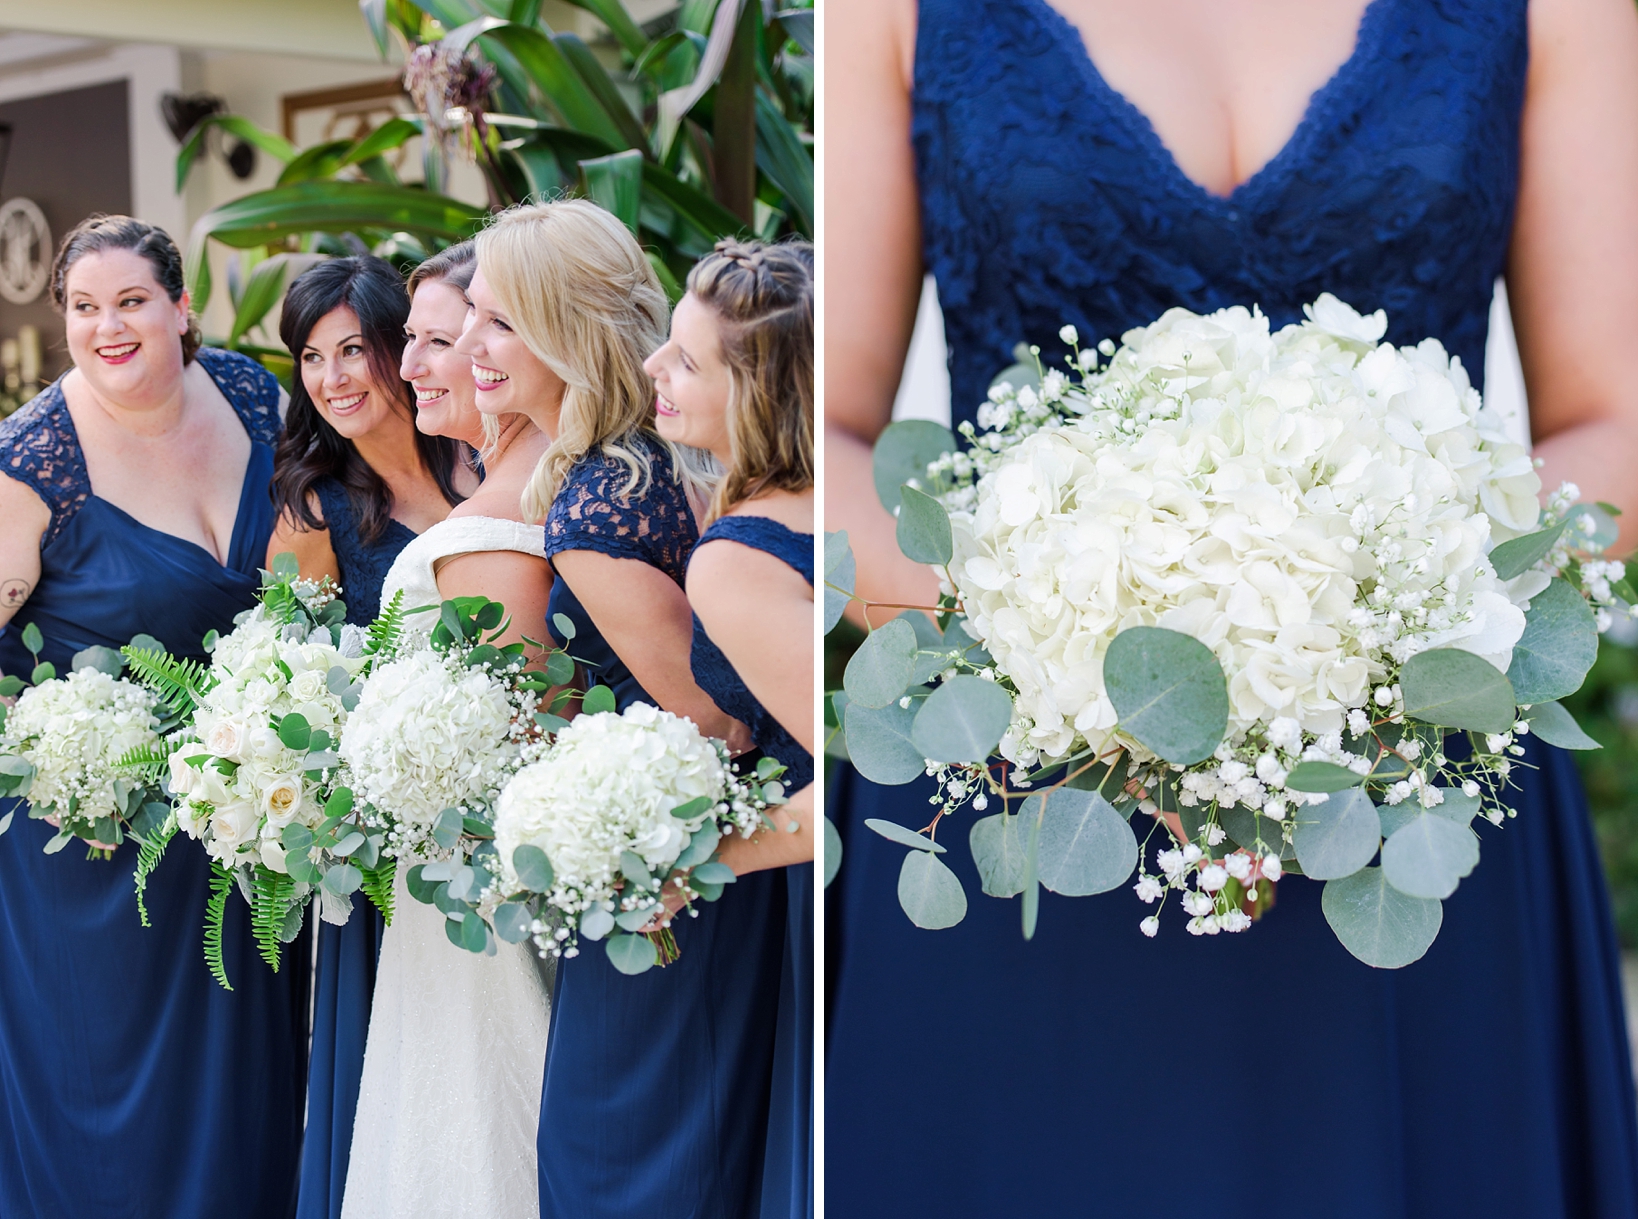 Bride and her bridesmaids posing while holding their white floral bouquets